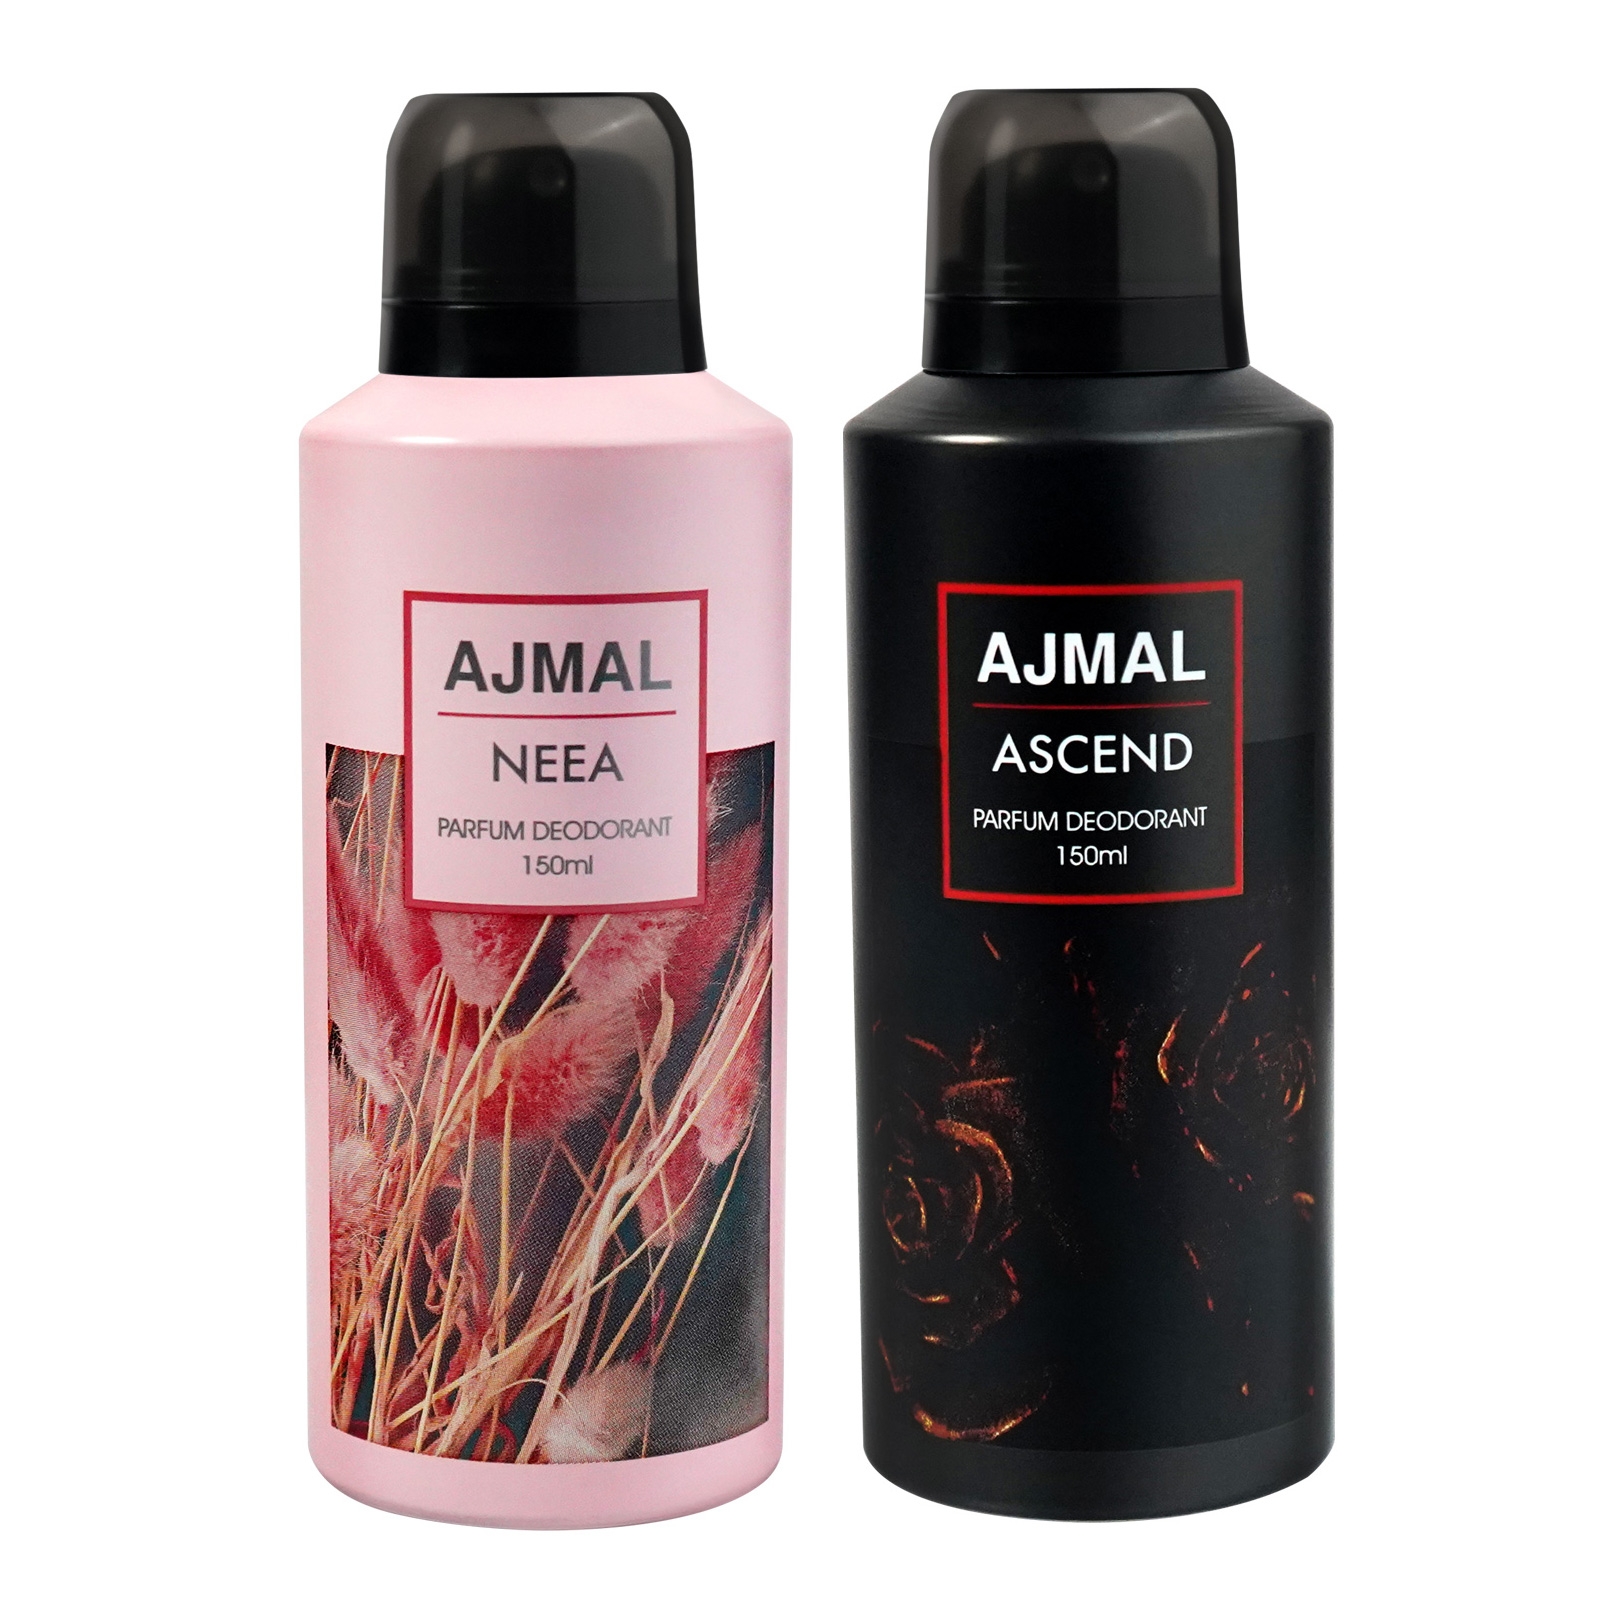 Ajmal Neea and Ascend Deodorant Perfume 150ML Each Long Lasting Spray Party Wear Gift For Men and Women Online Exclusive